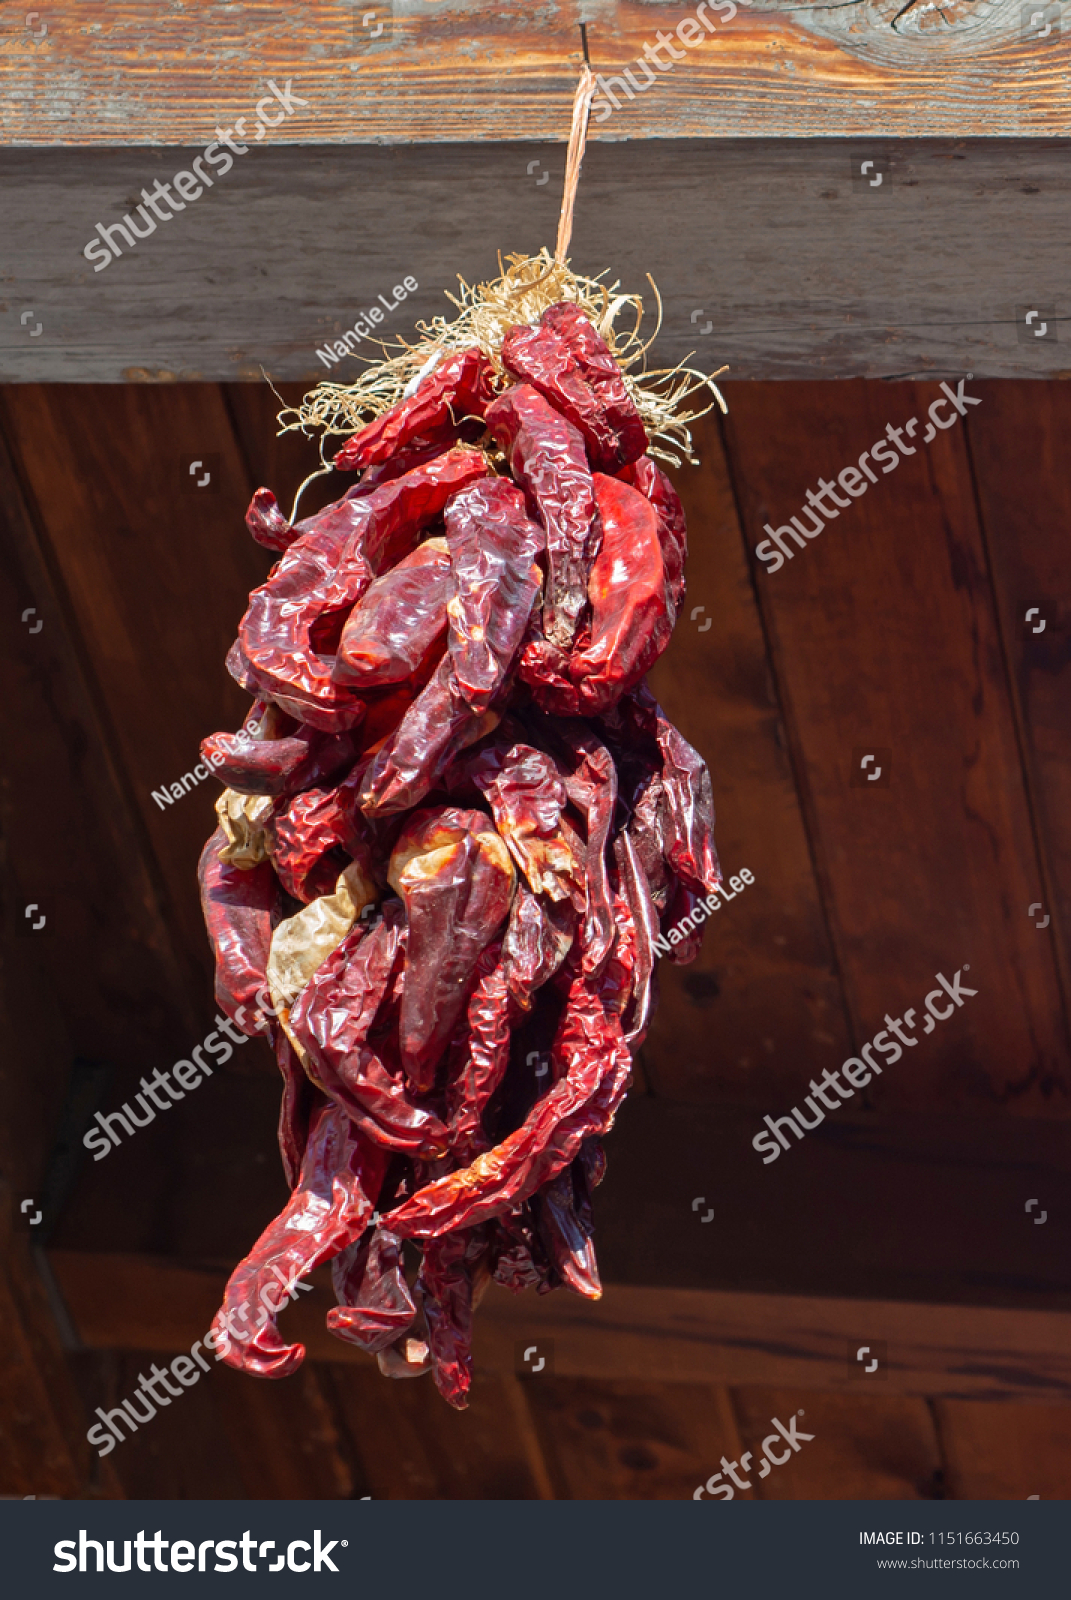 A long ristra of dried red chilis hanging from a beam outdoors.  #1151663450